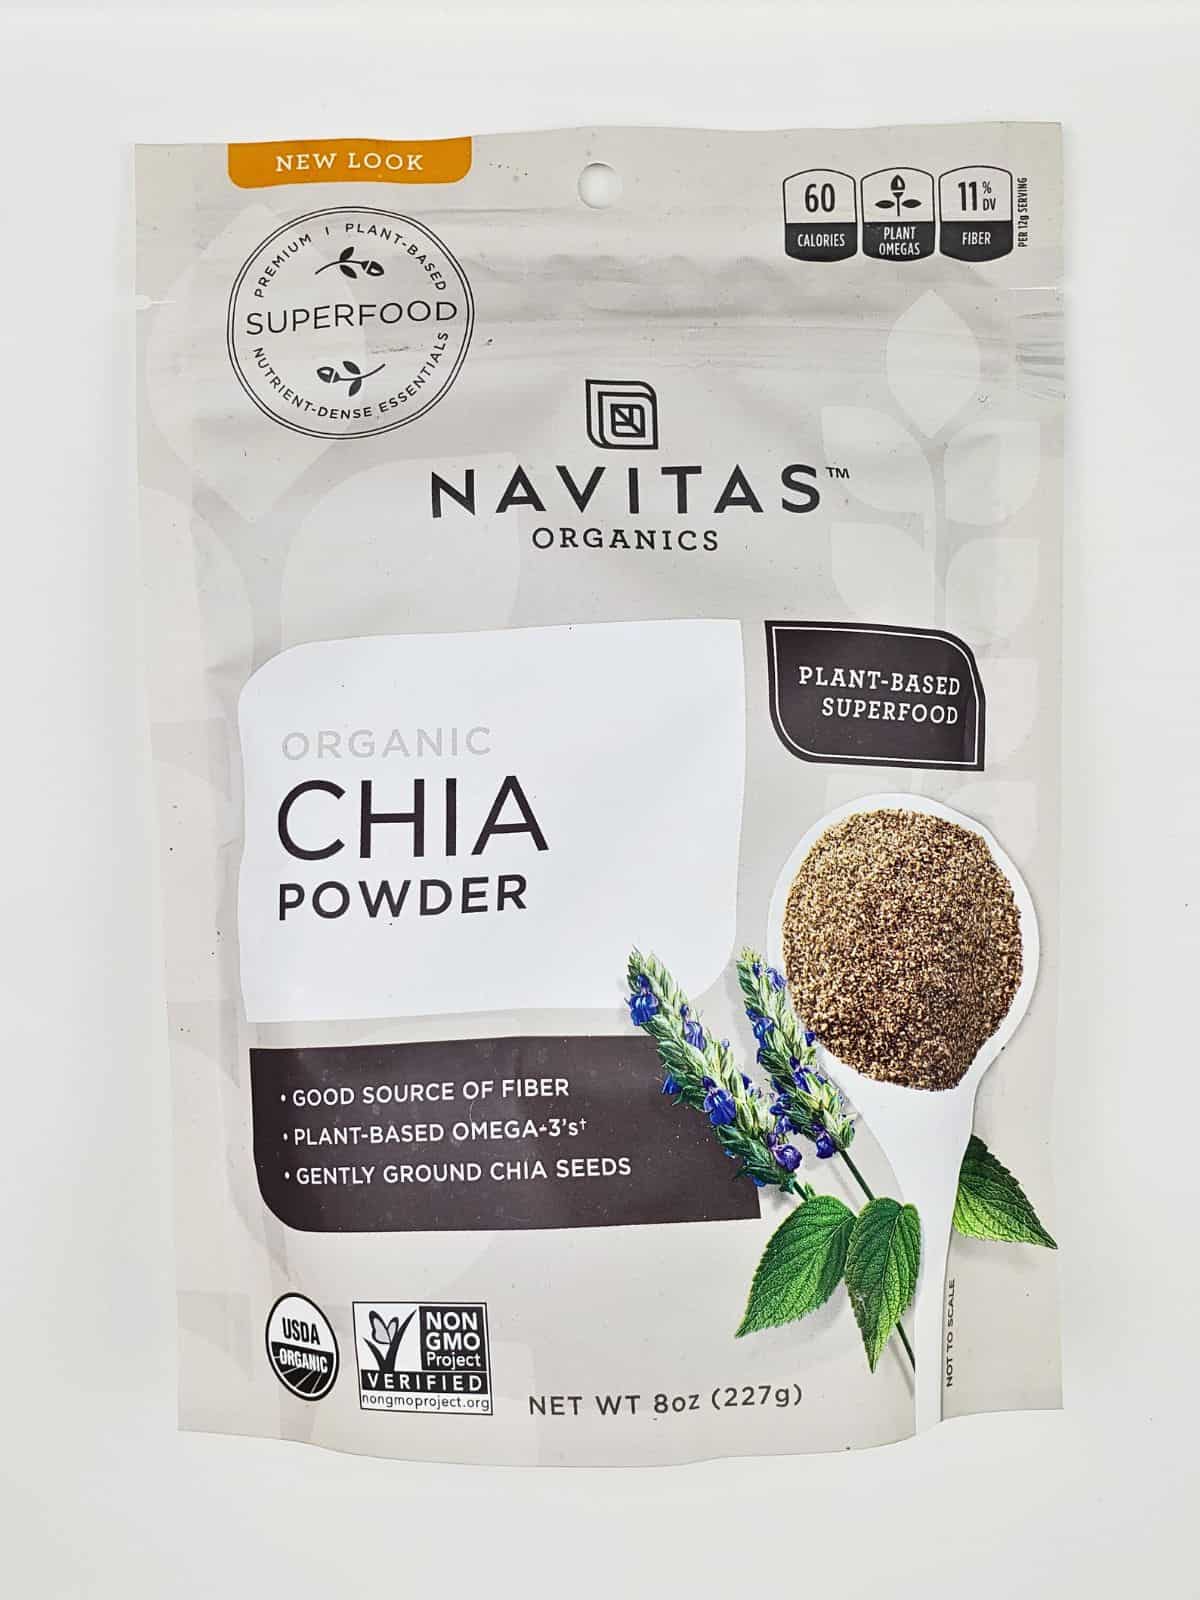 a pack of 9 oz. of organic chia powder from Navitas.